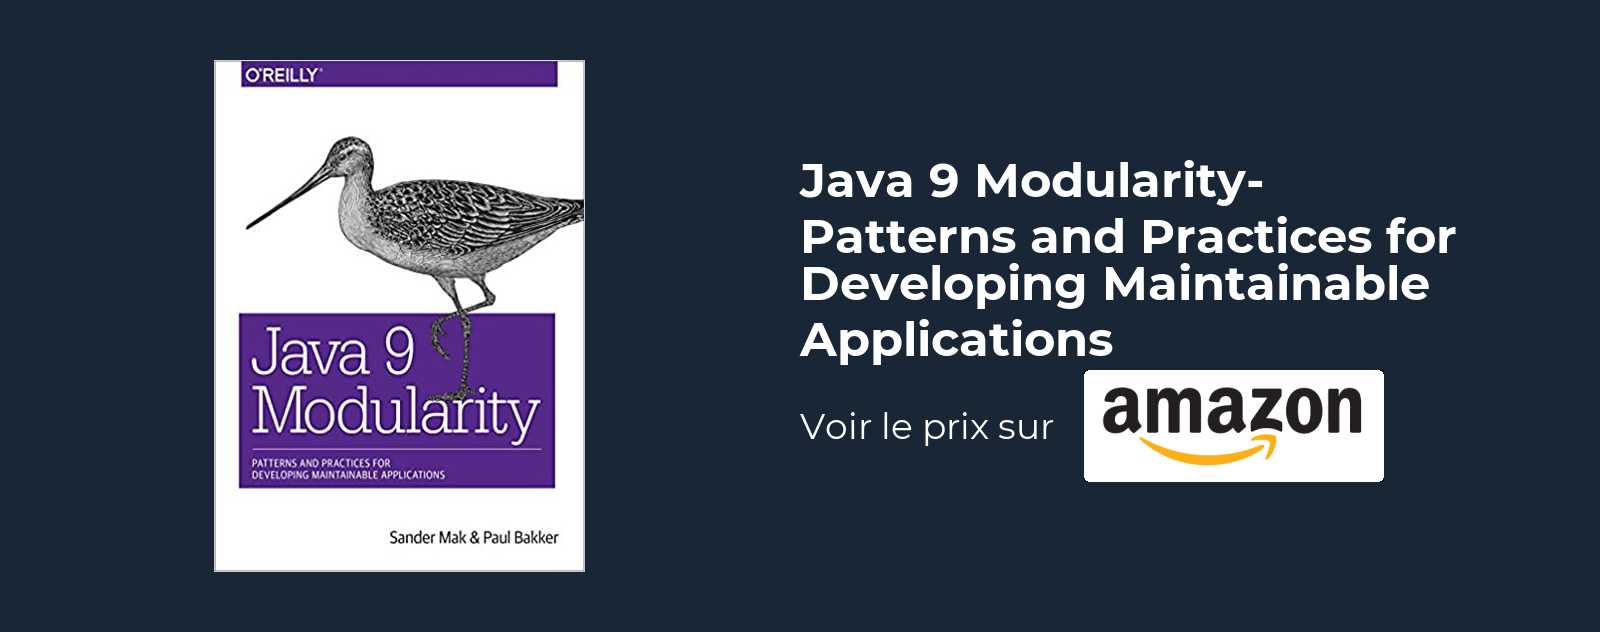 Java 9 Modularity- Patterns and Practices for Developing Maintainable Applications